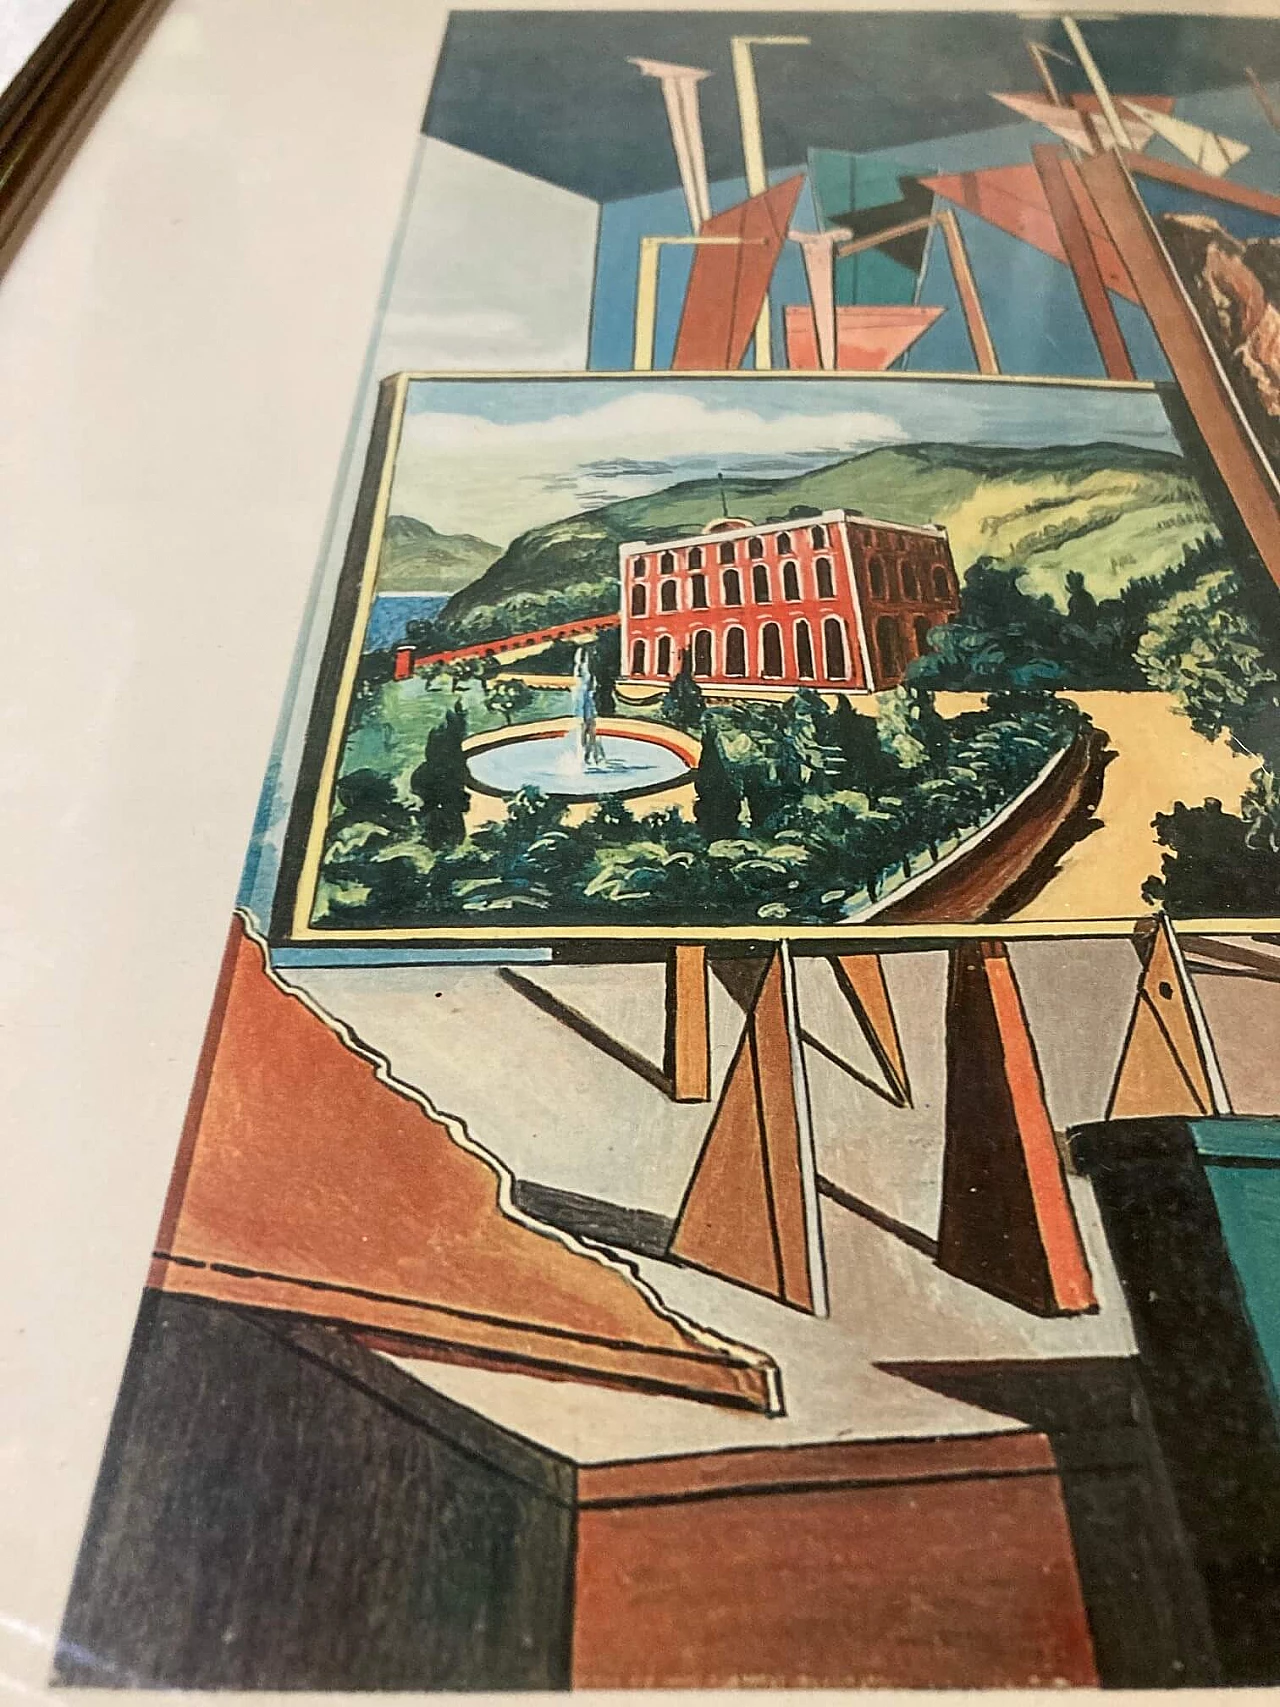 Giorgio De Chirico, Metaphysical interior with biscuits, lithography, 1968 10